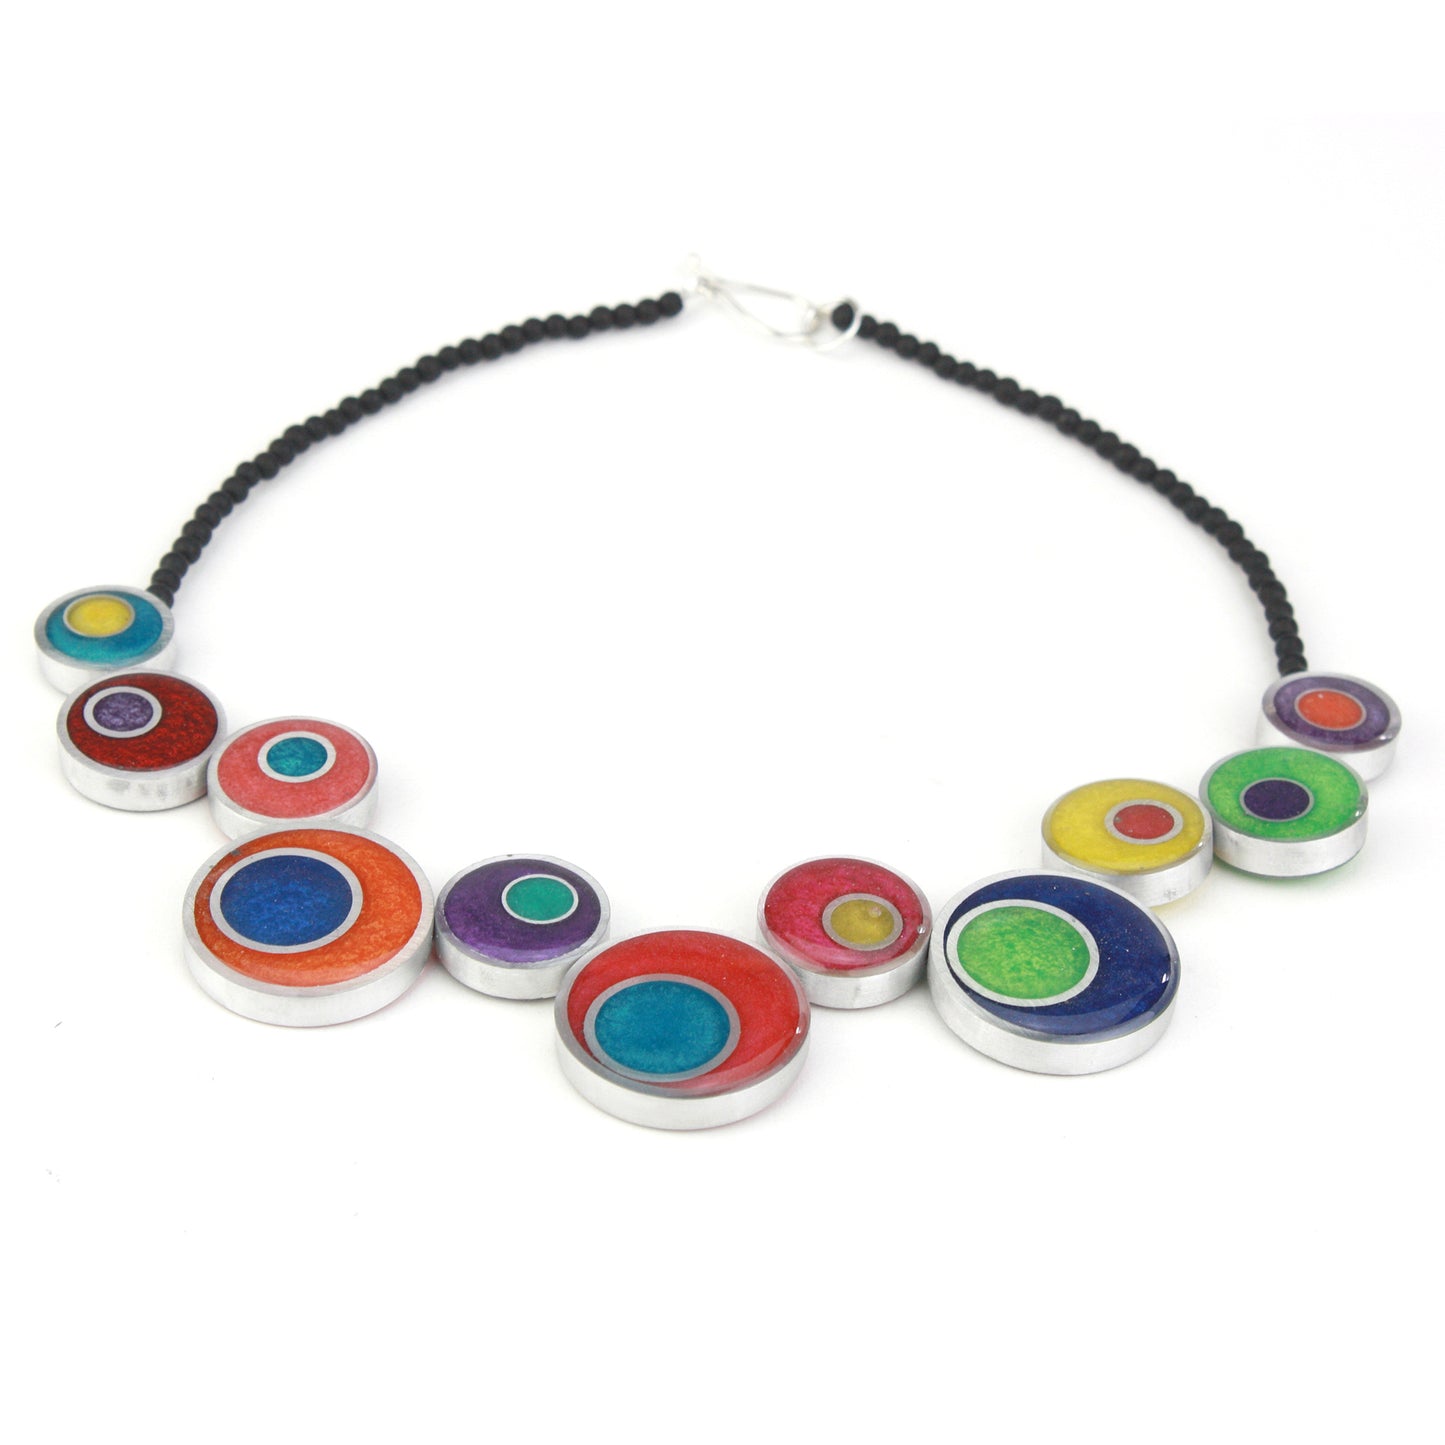 Resinique offset circle necklace - Multi colored